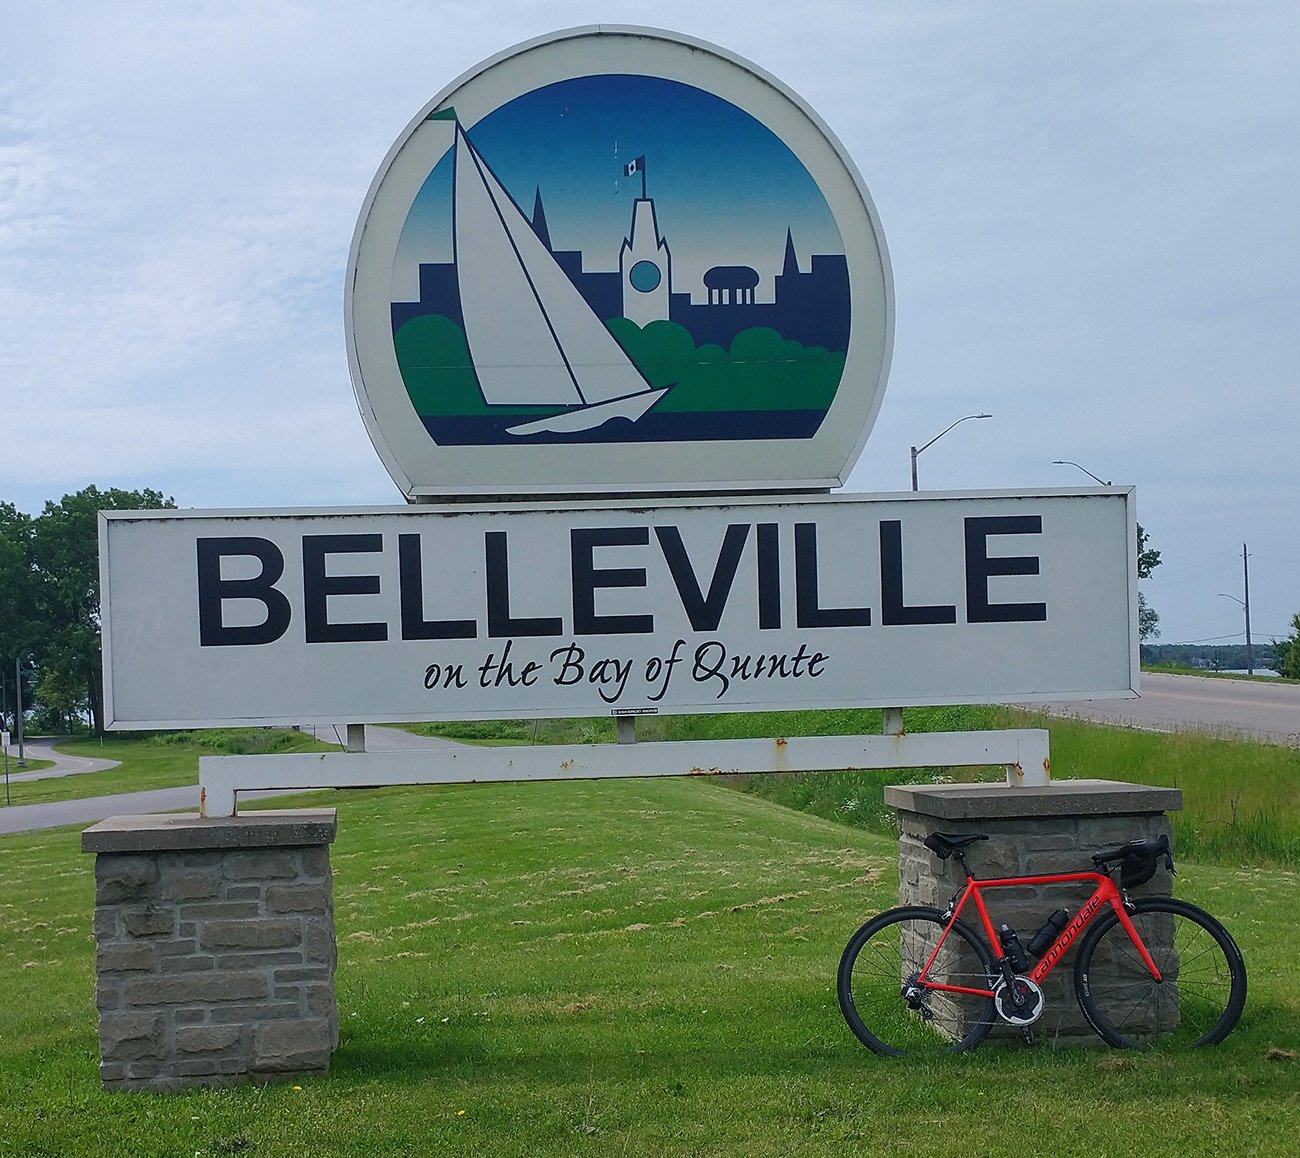 Started the ride in Belleville, where you can cross into Prince Edward county.